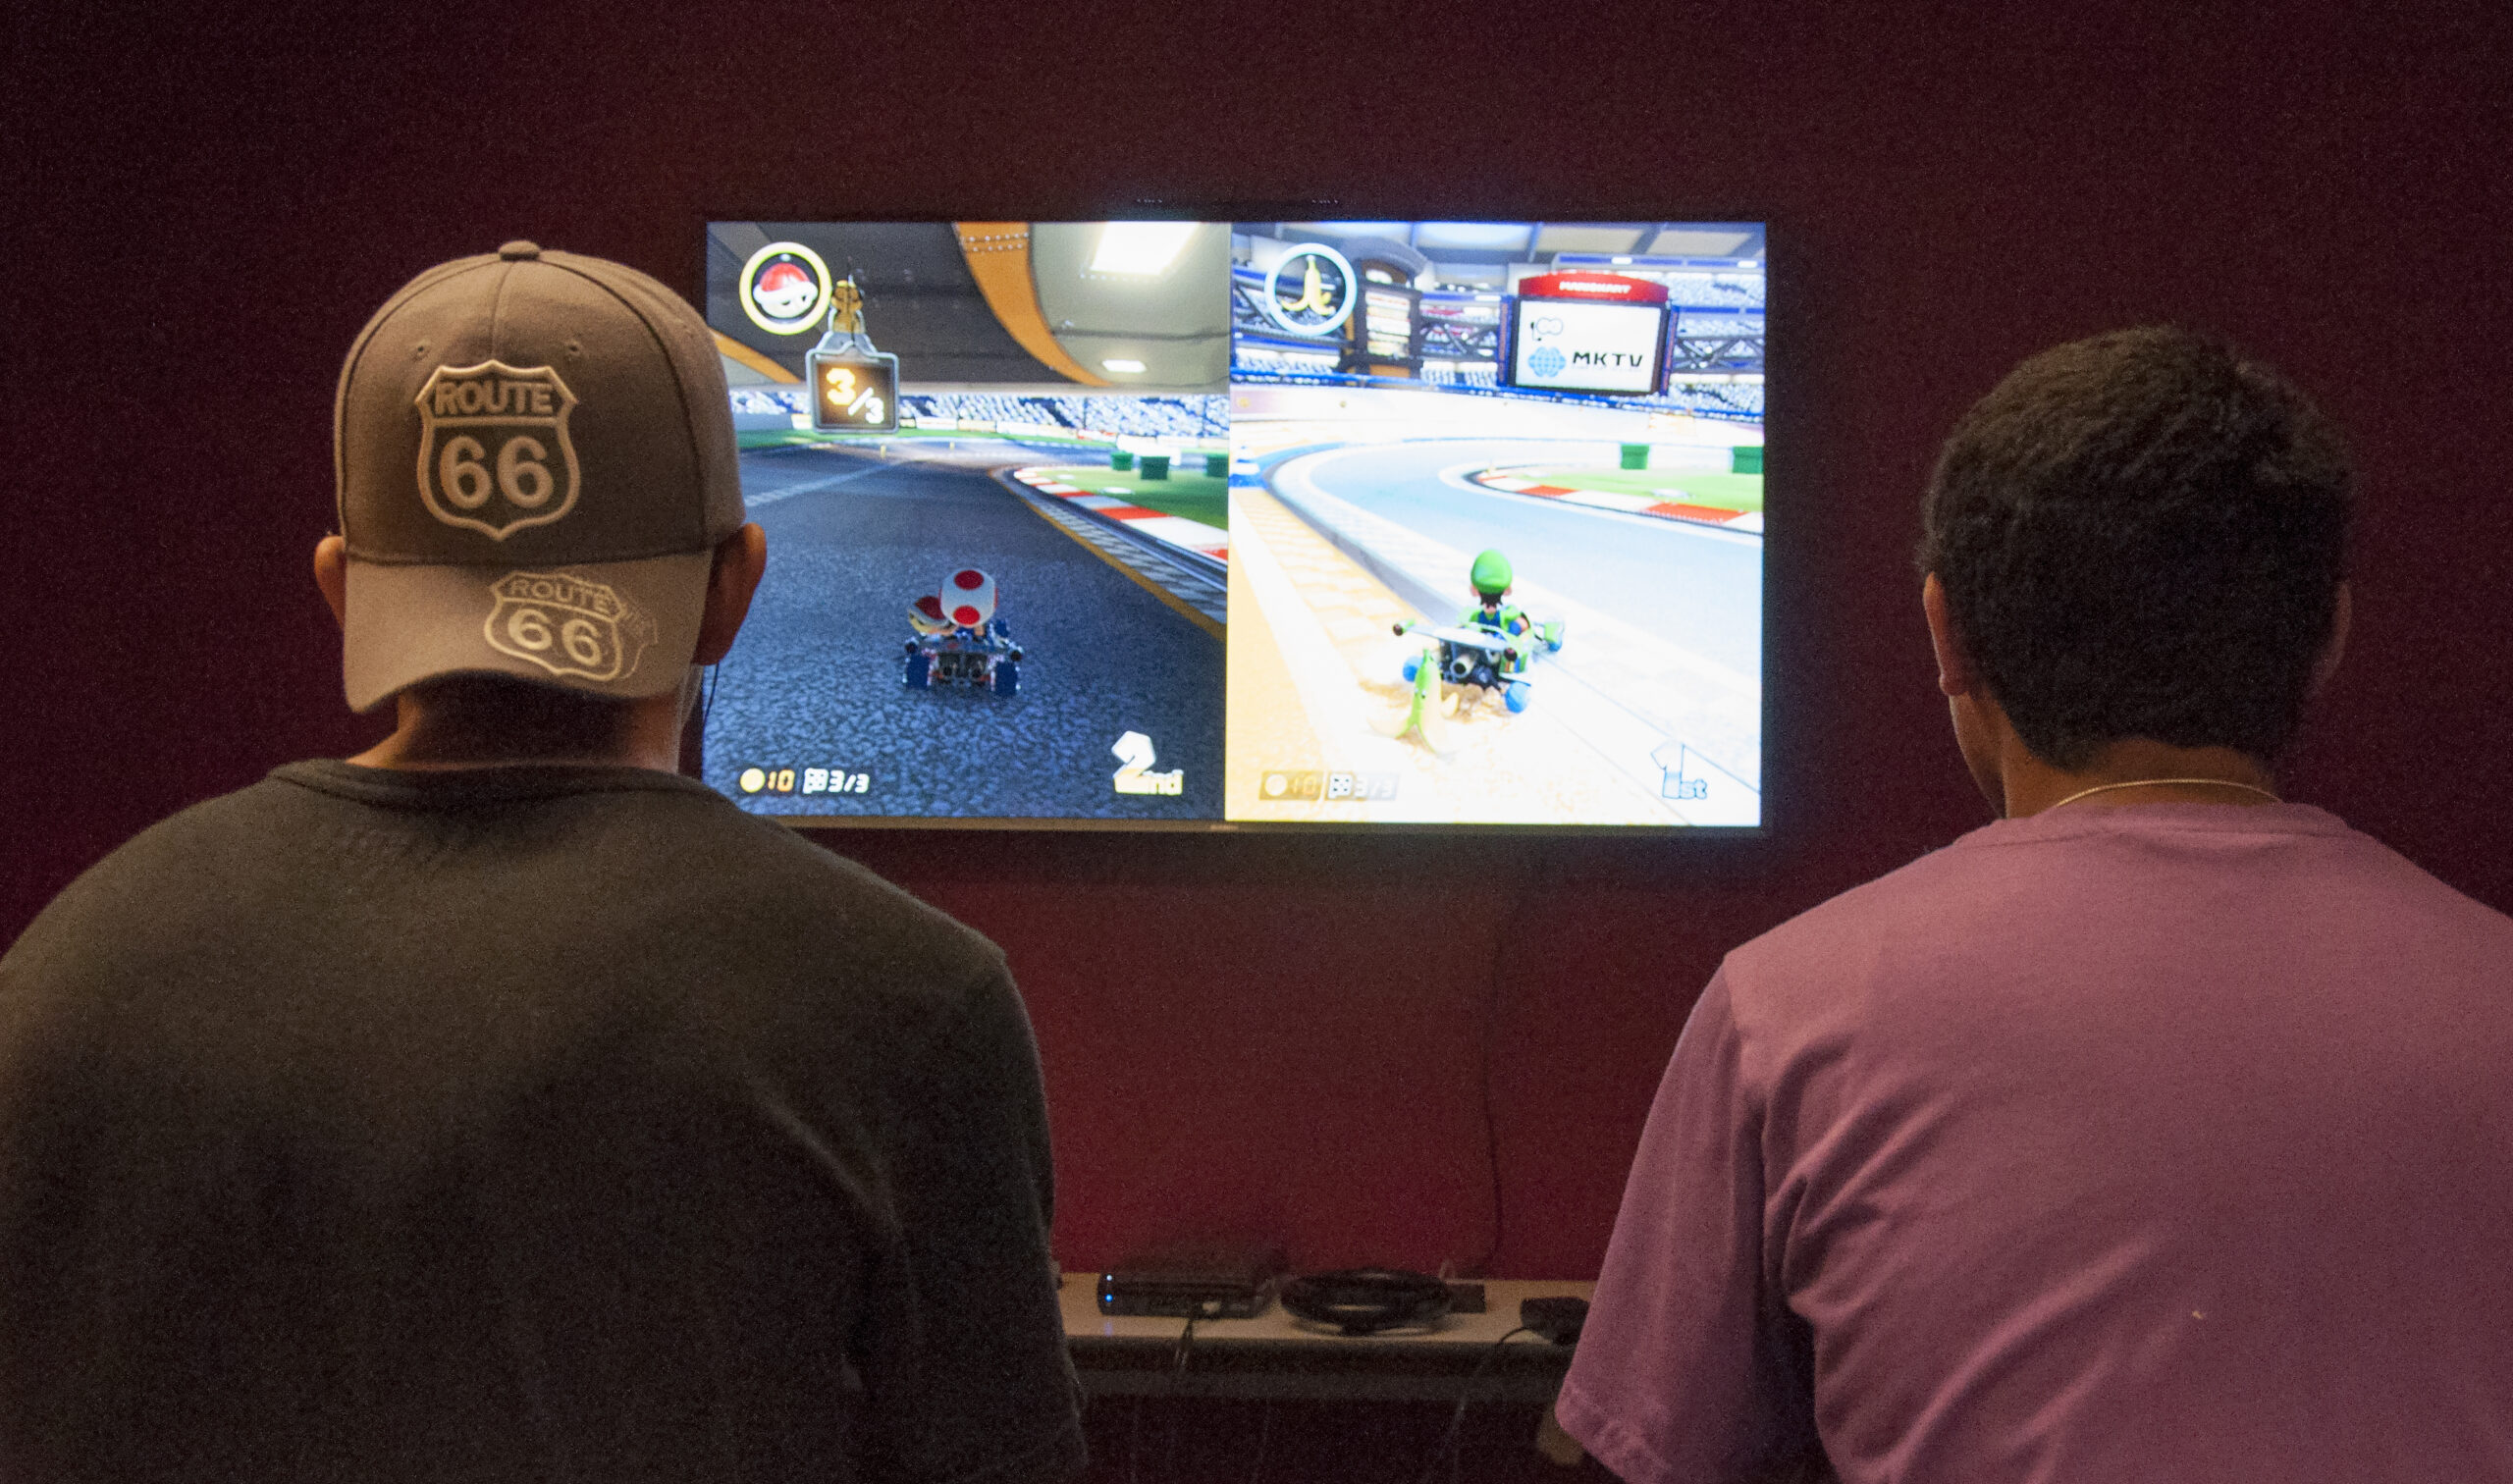 CSUDH’s Hole in the Wall: The Game Lounge